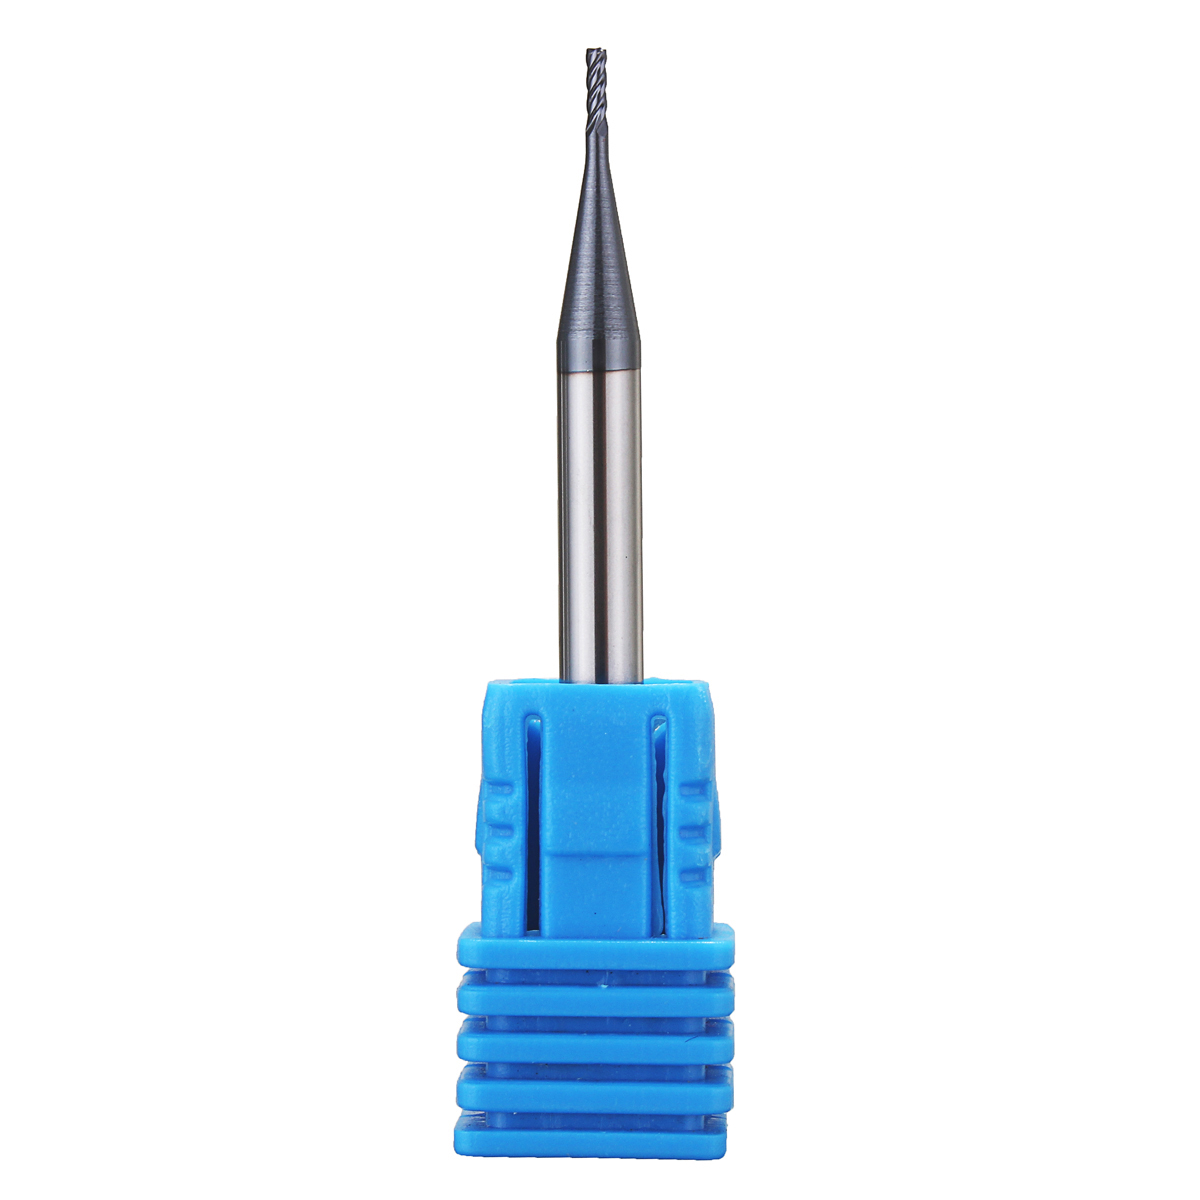 Drillpro-1mm-4-Flutes-End-Mill-Cutter-50mm-Length-Tungsten-Carbide-Milling-Cutter-CNC-Tool-1516233-1